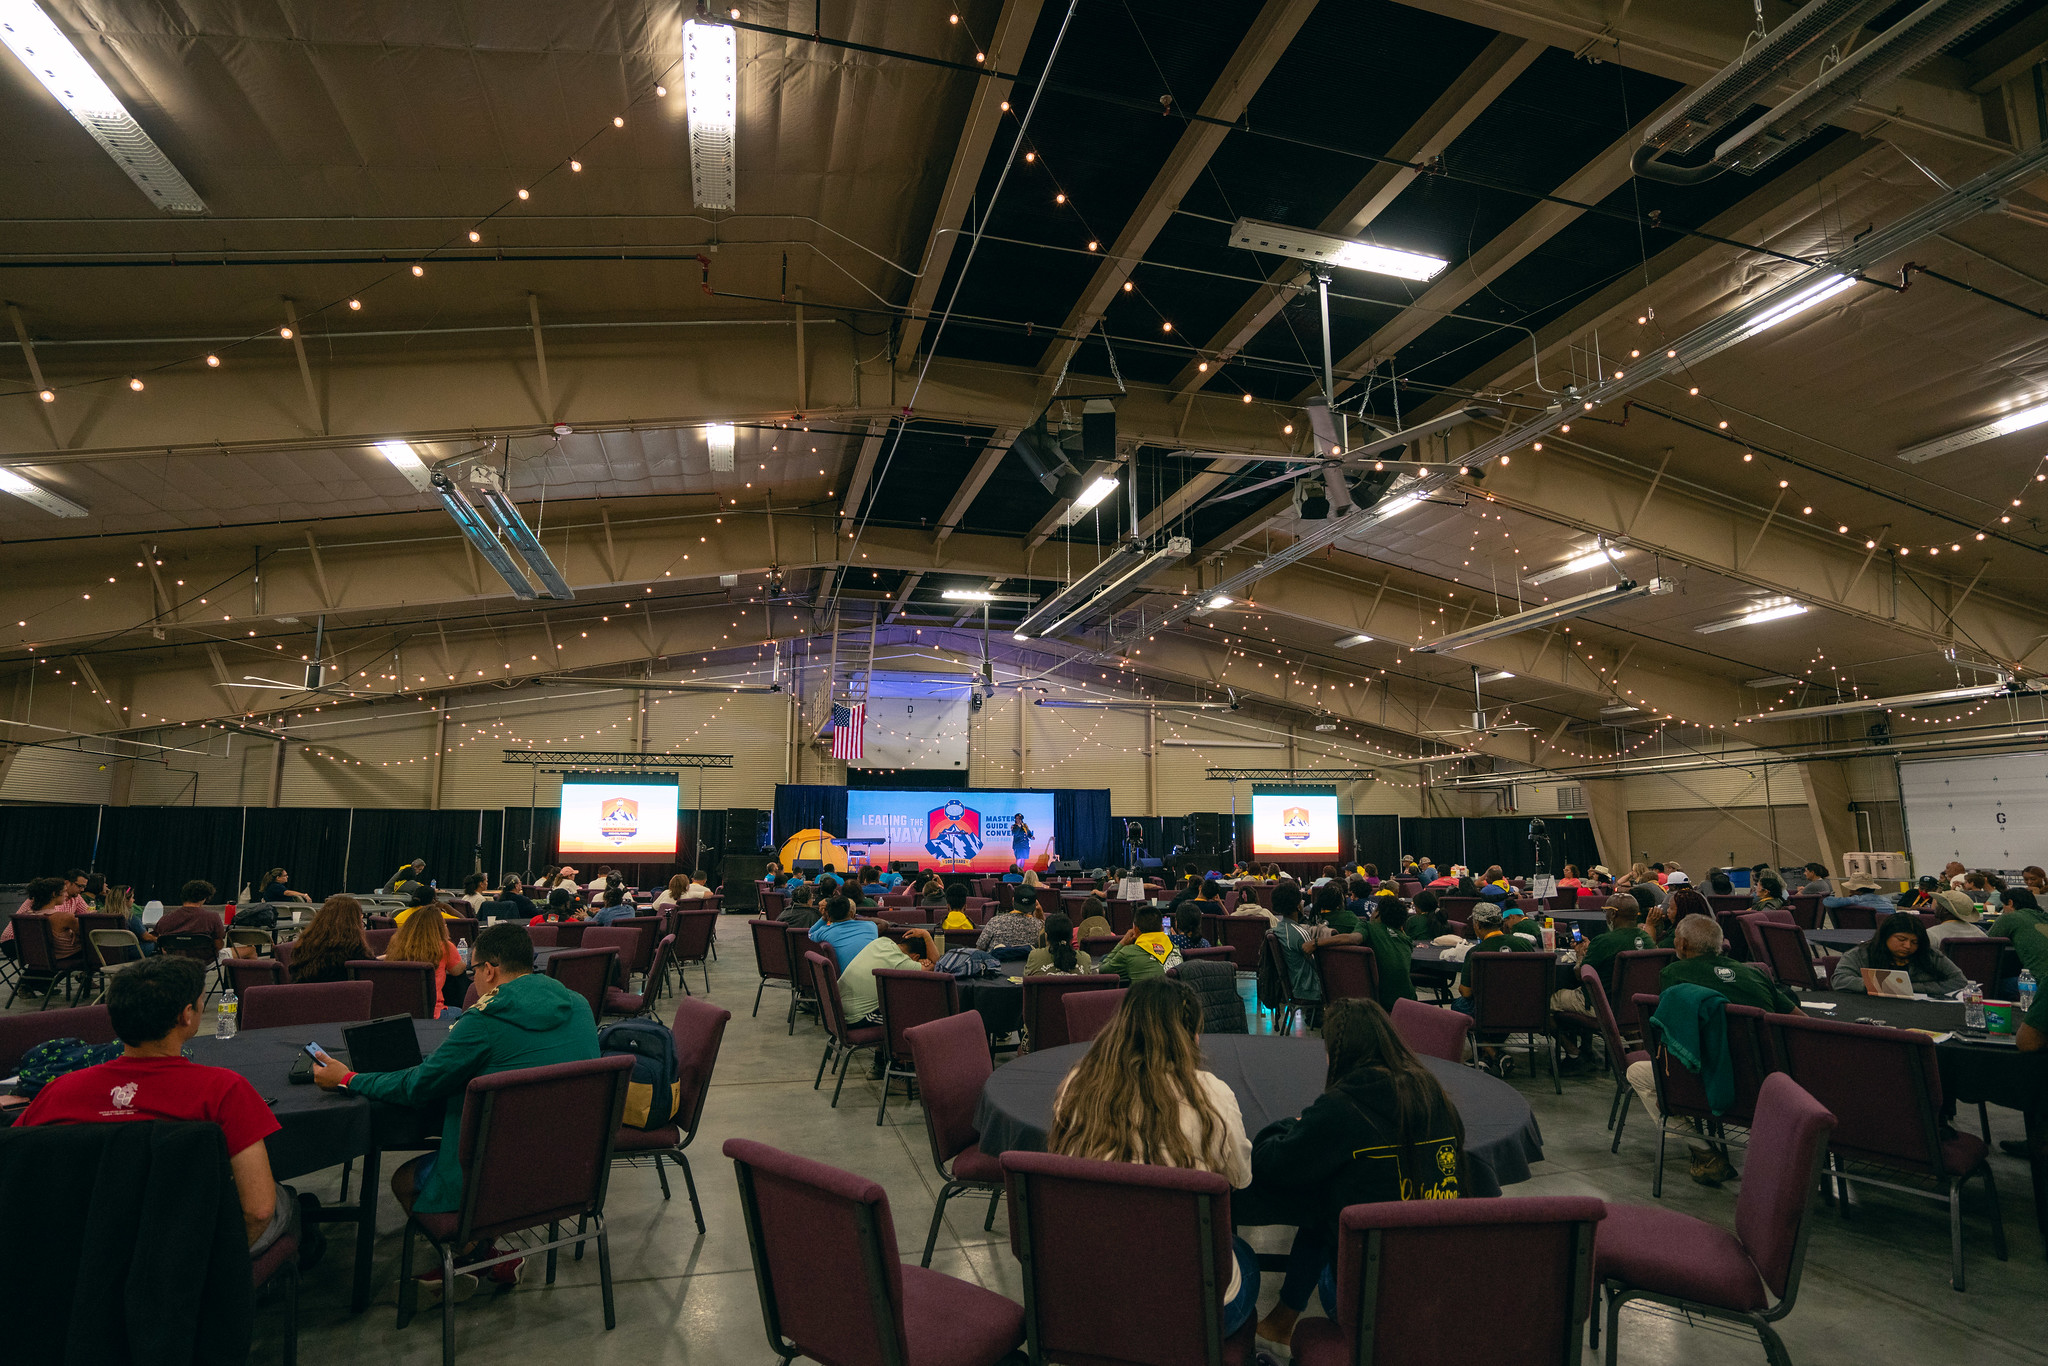 The main meeting hall in Estes Park, Colorado during a general session. Photo by Pieter Damsteegt | North American Division